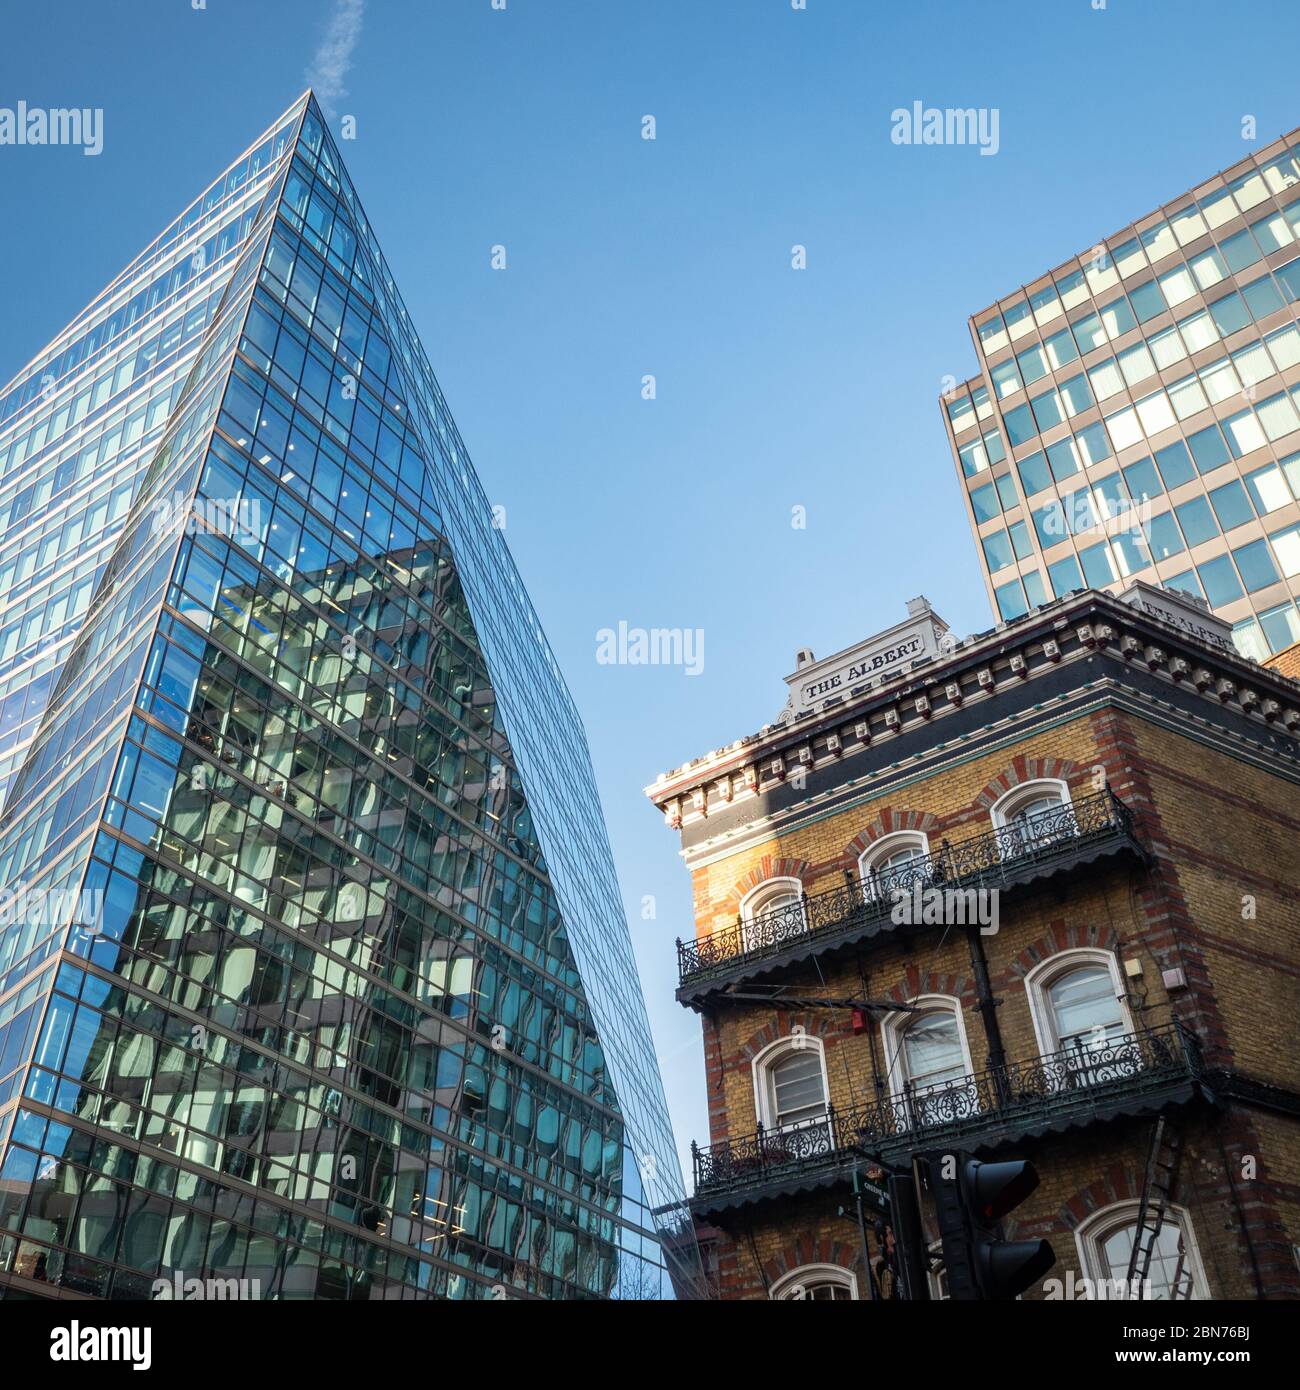 Old and New. Contrasting architectural styles in central London with an abstract angular office block set against a traditional old pub. Stock Photo